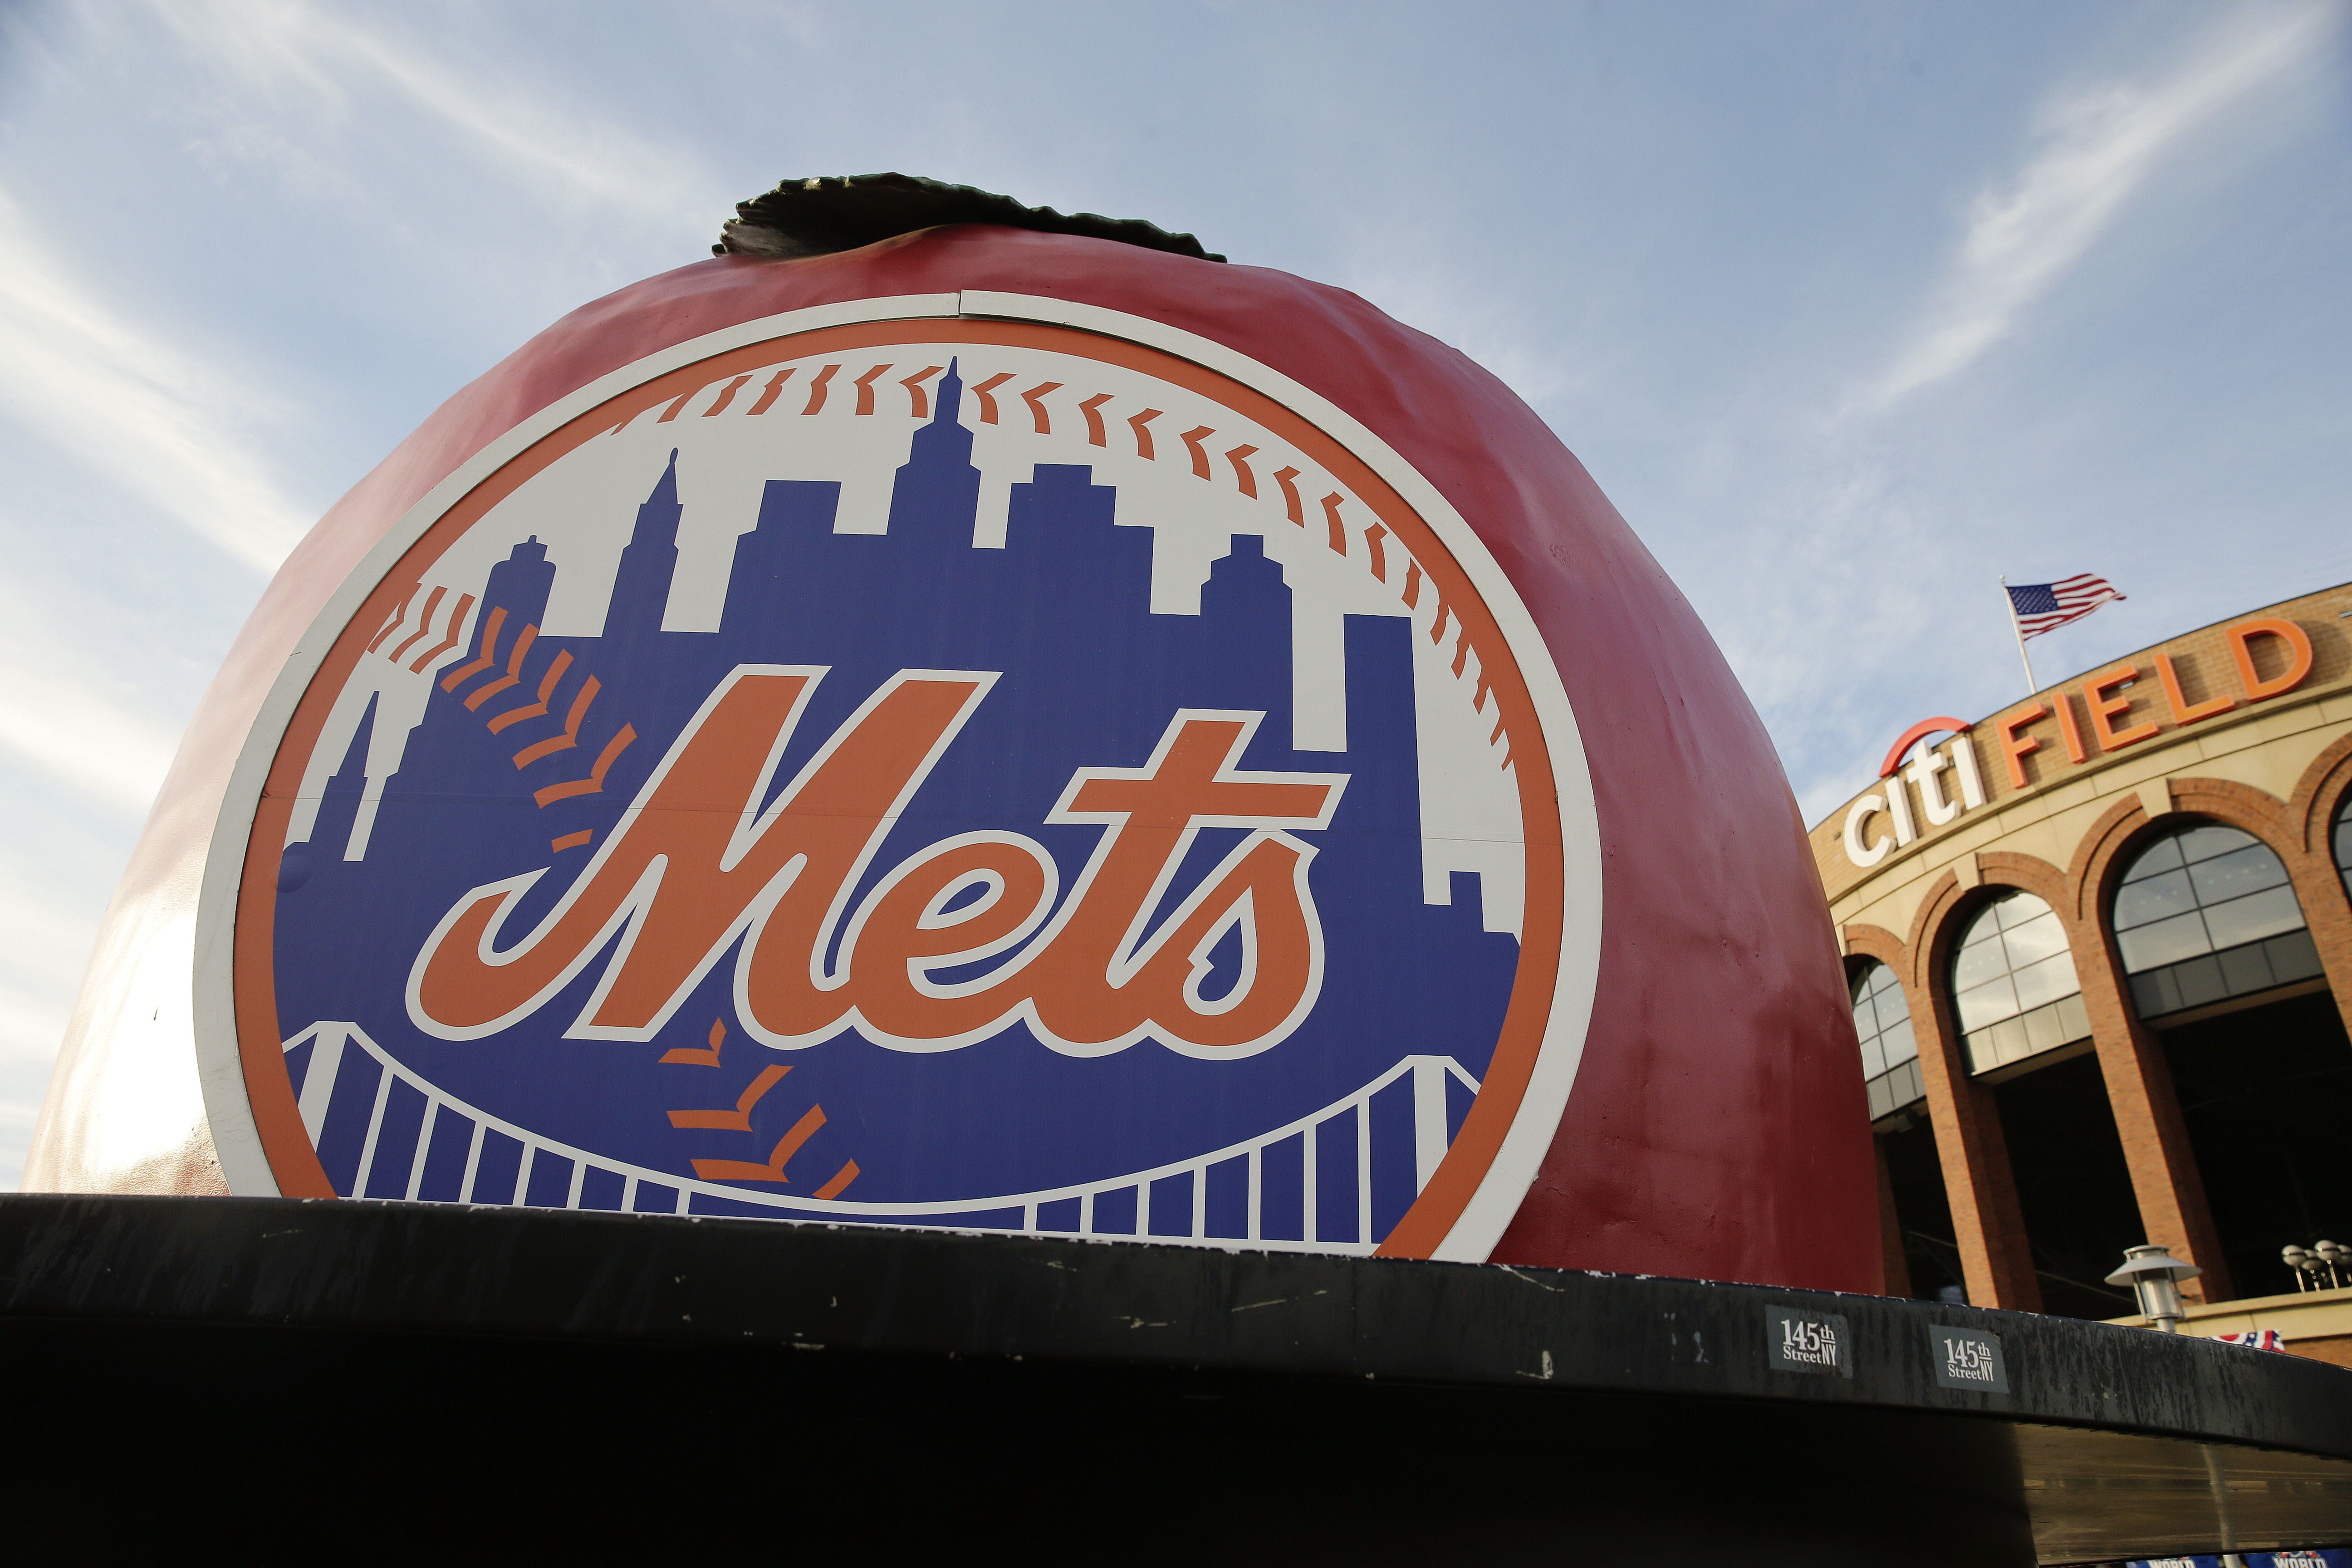 New York Mets: When and where to watch the Amazins in 2020